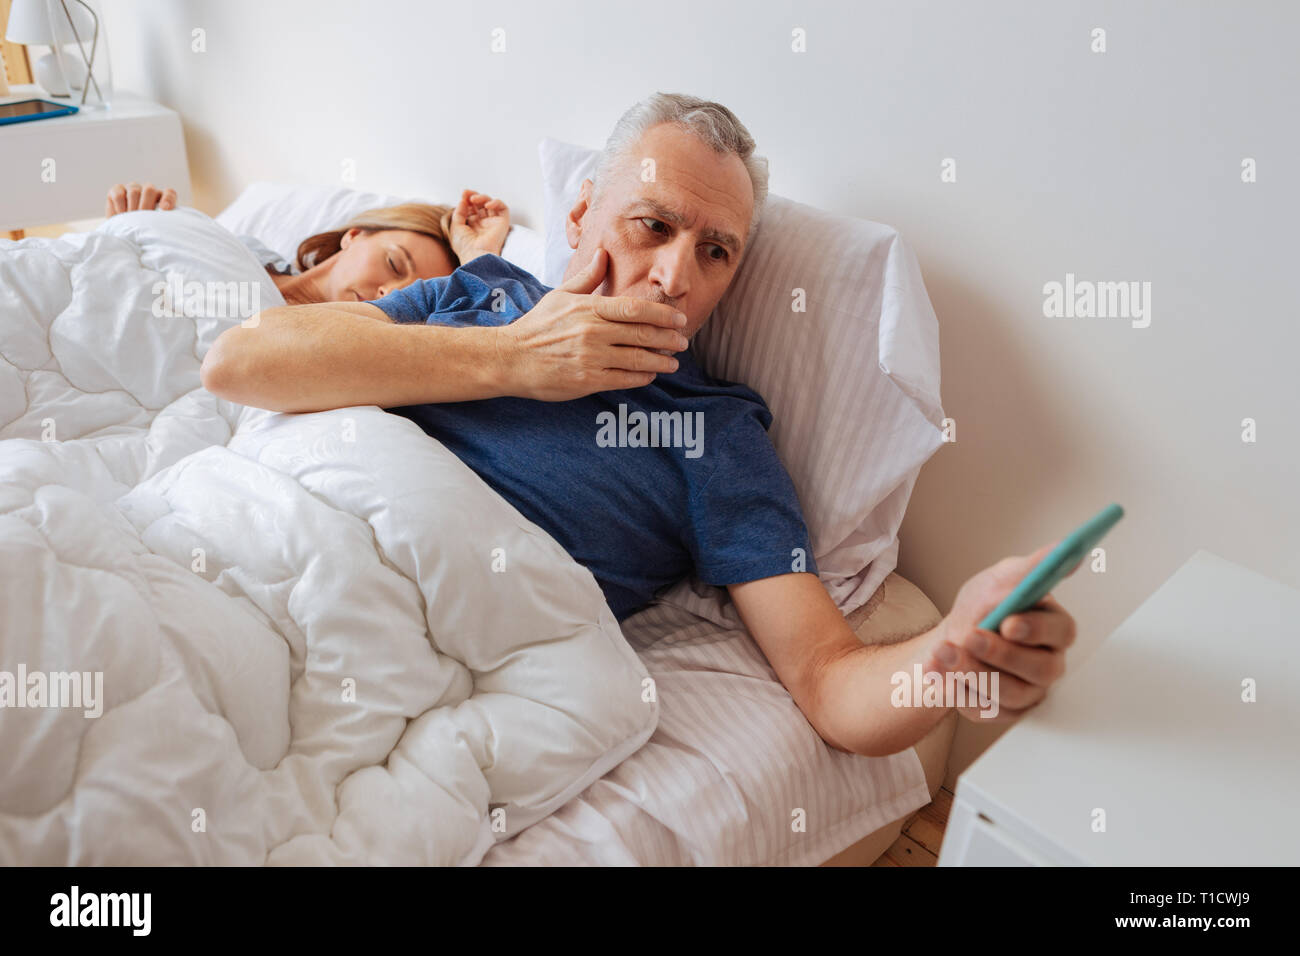 Dark-haired husband after seeing disturbing message from son Stock Photo